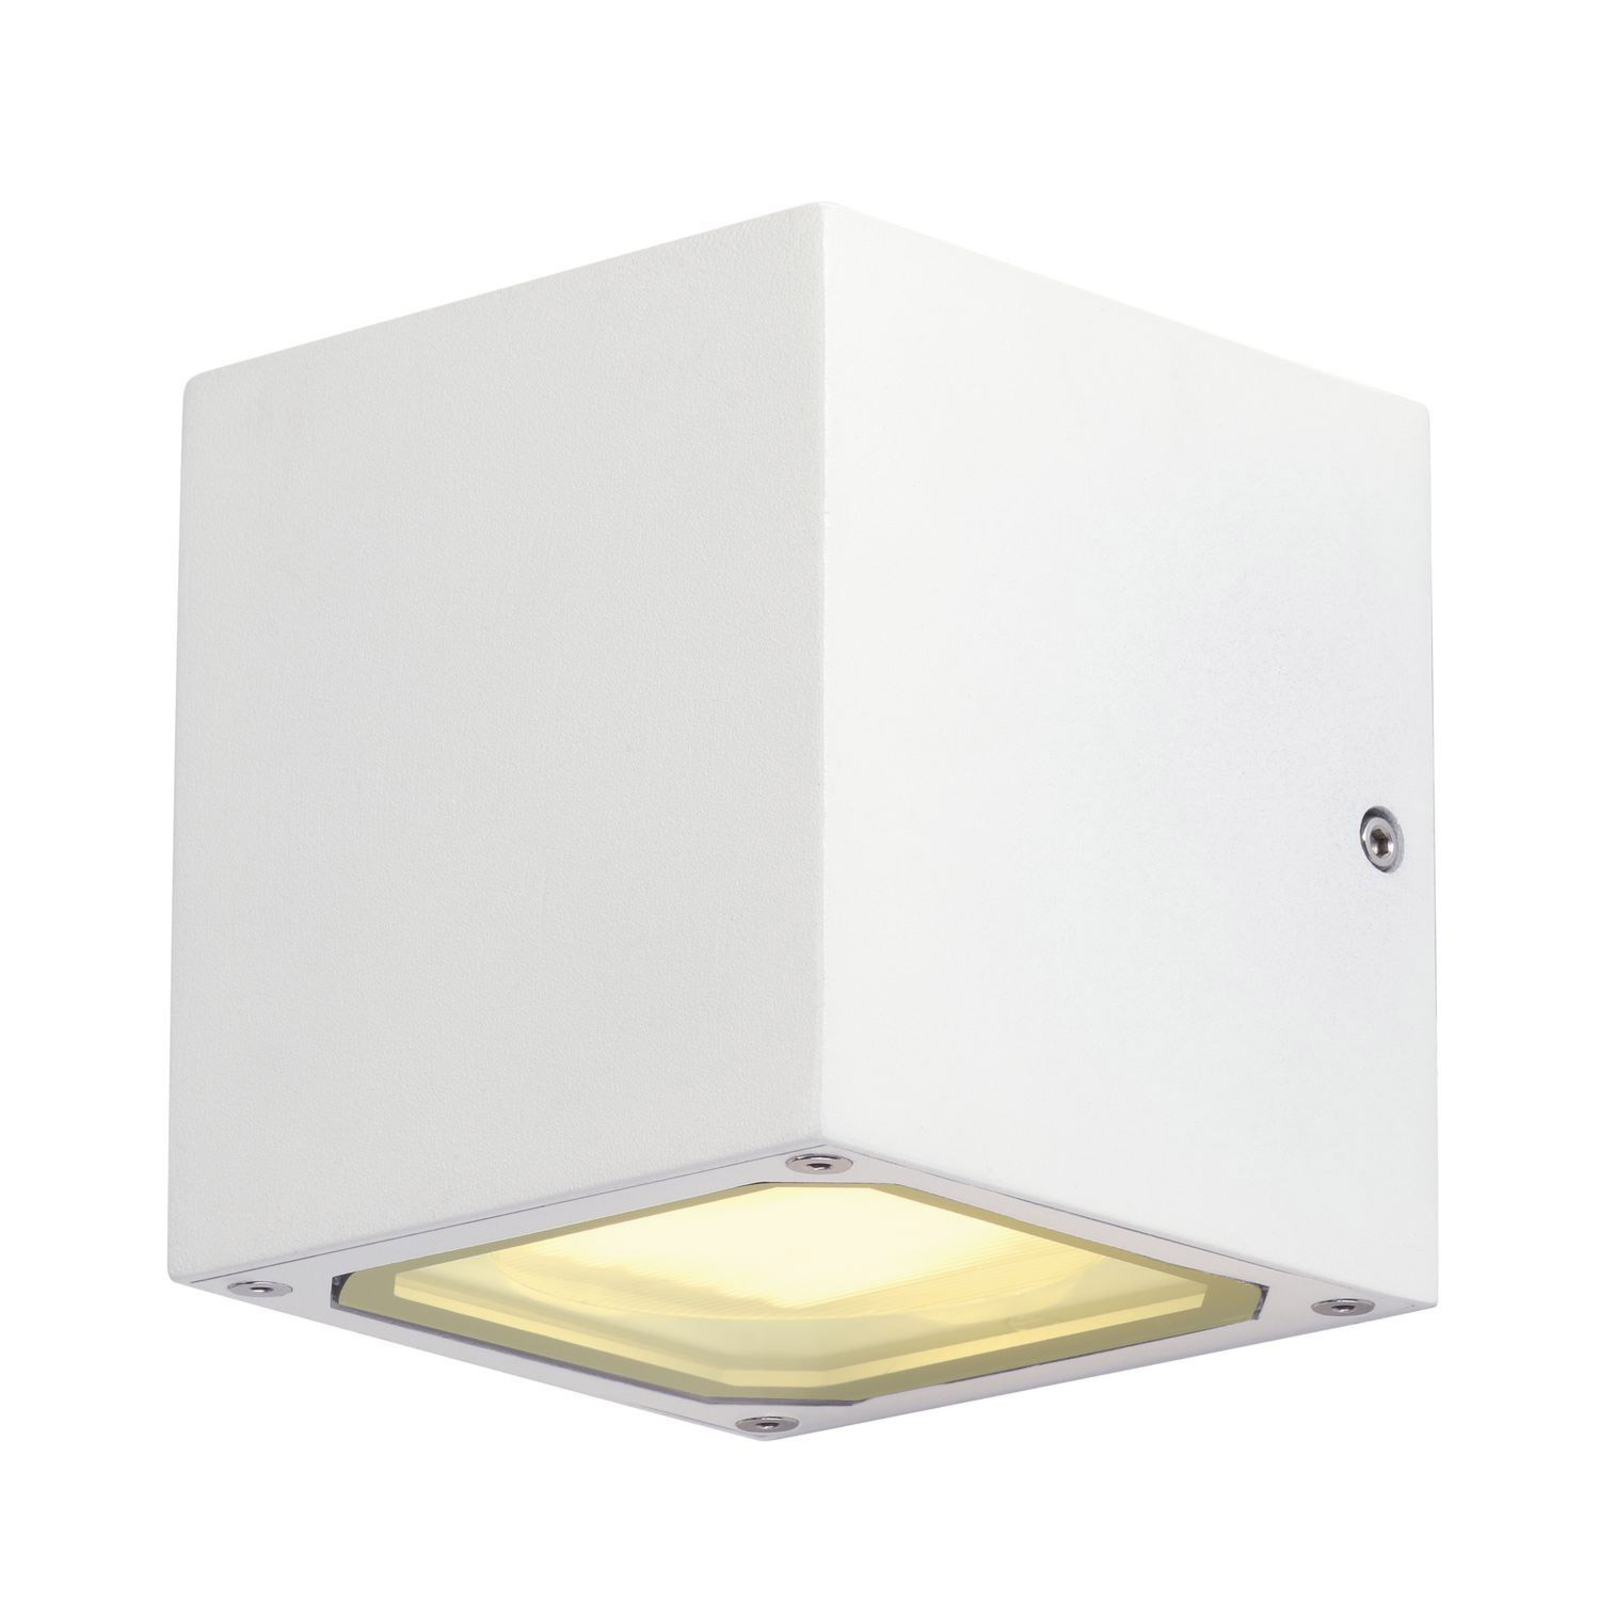 SLV Sitra Cube outdoor wall light, white